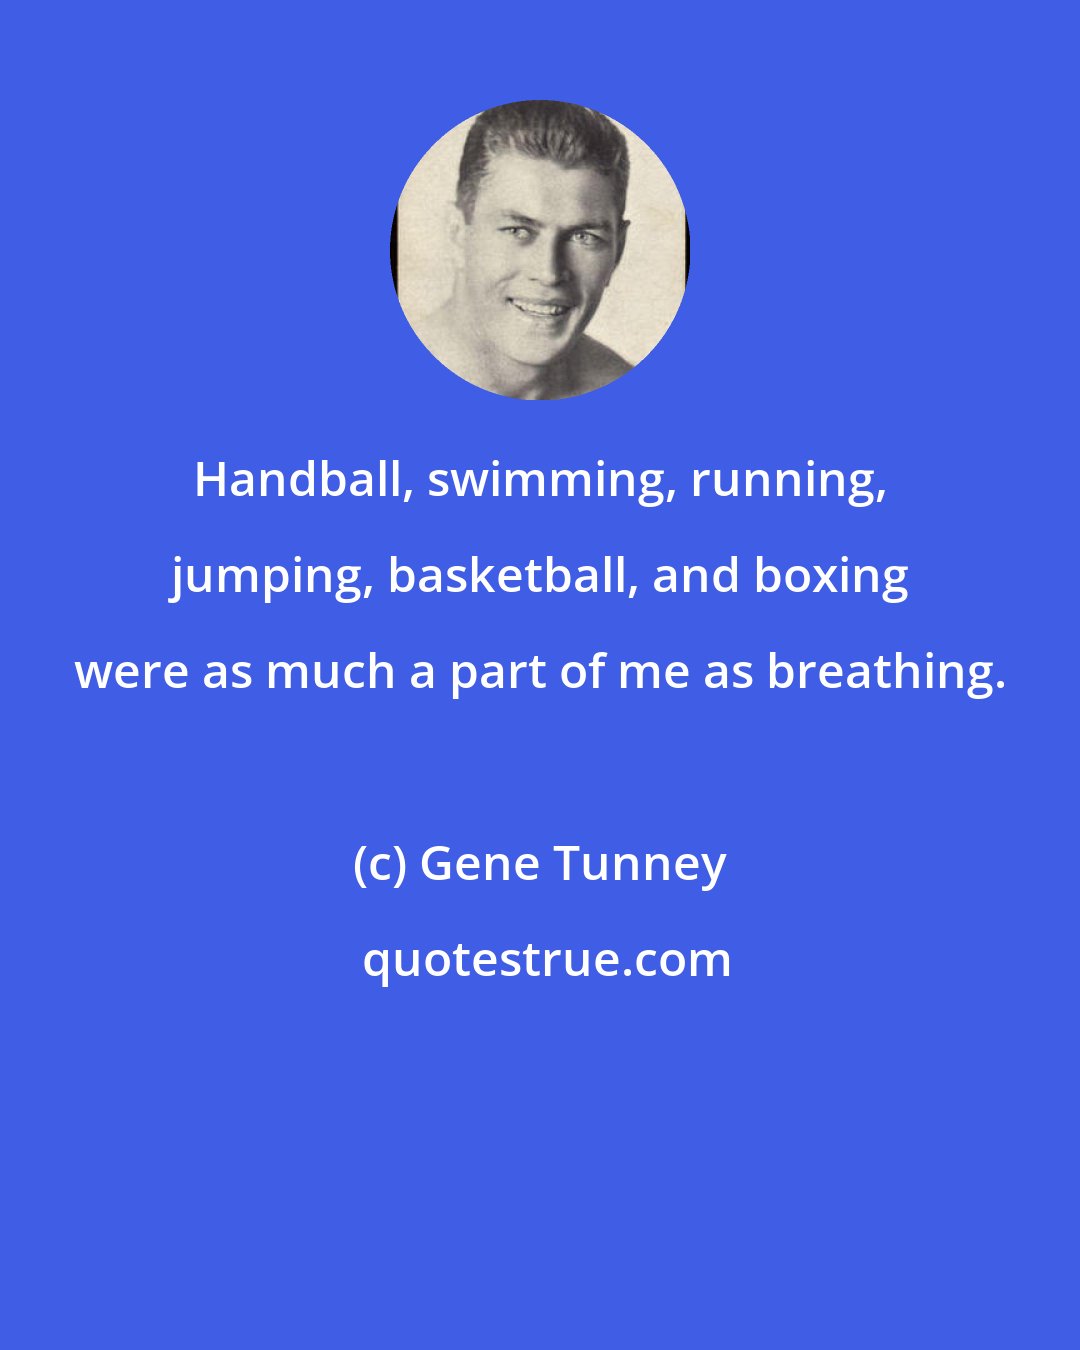 Gene Tunney: Handball, swimming, running, jumping, basketball, and boxing were as much a part of me as breathing.